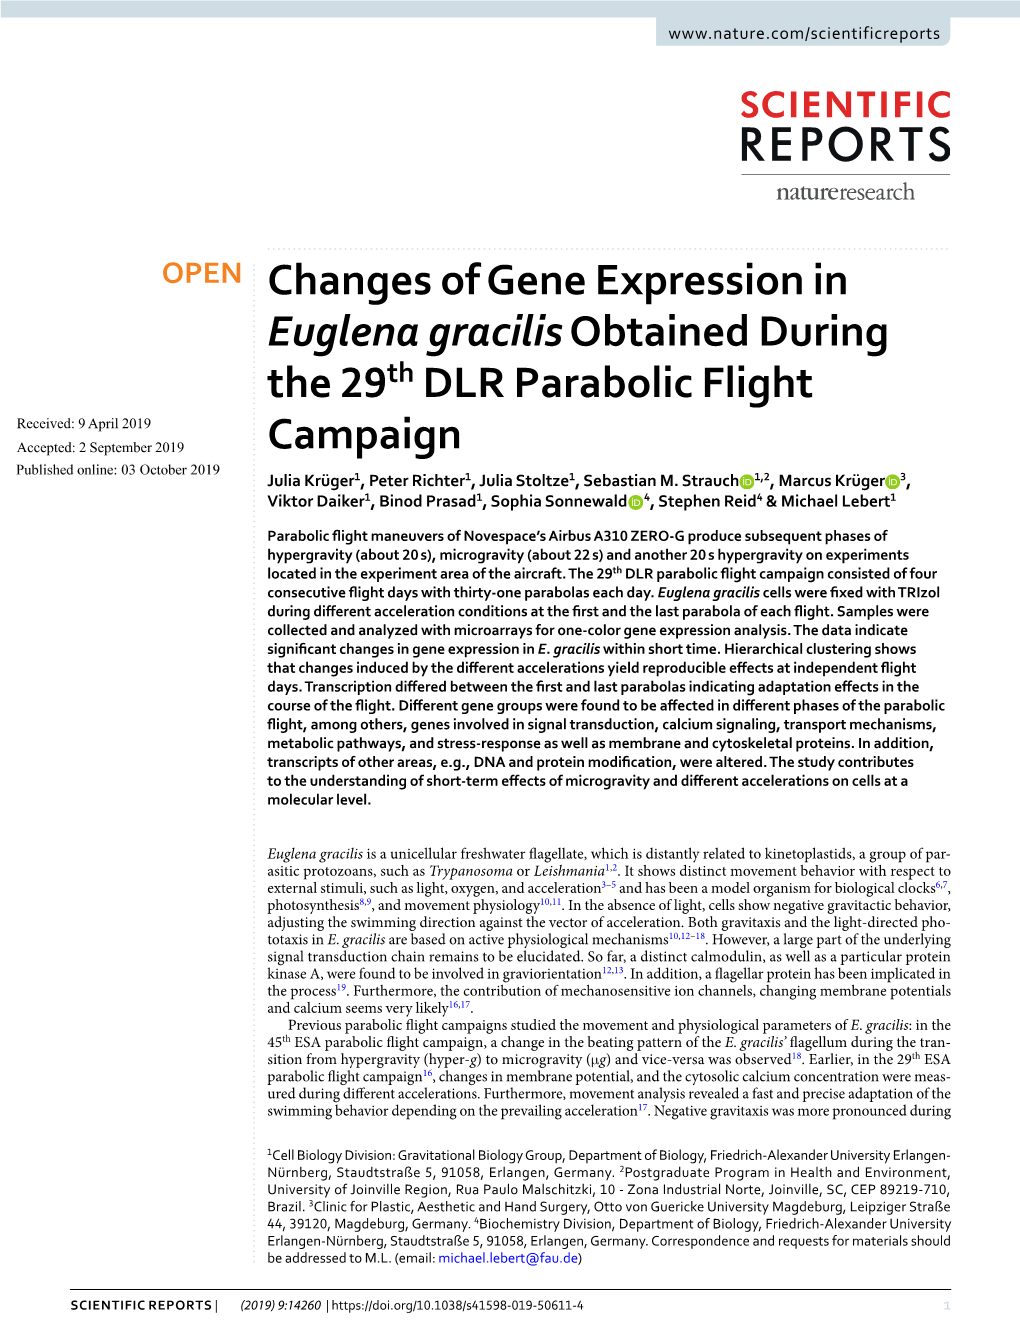 Changes of Gene Expression in Euglena Gracilis Obtained During the 29Th DLR Parabolic Flight Campaign